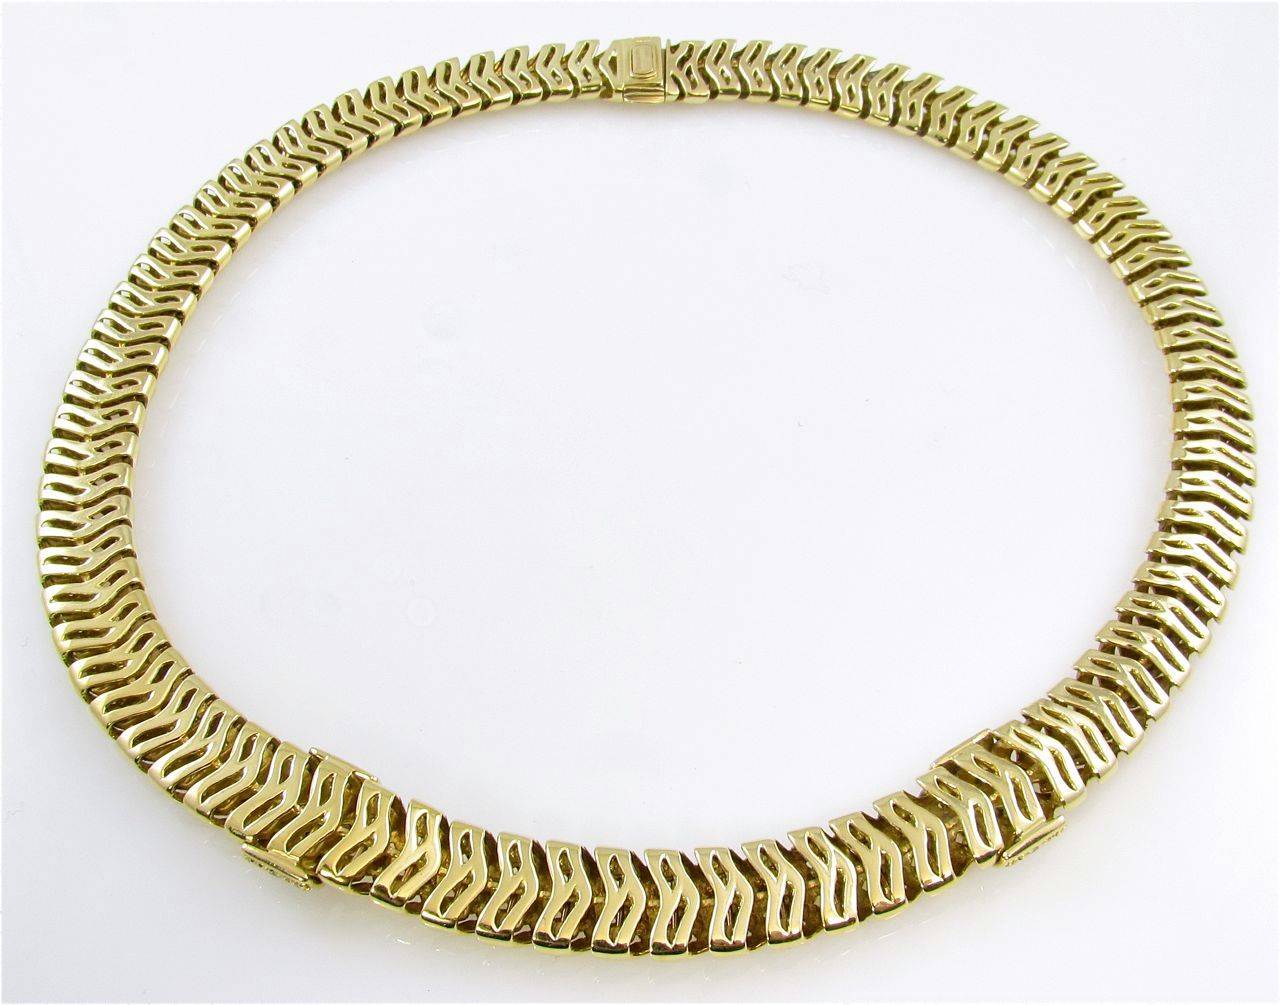 An 18 karat yellow gold and diamond “Vannerie” necklace by Tiffany & Co., dated 1995.  The choker length necklace is of openwork woven gold design measuring 1/2 inch wide, the front section is set with 2 round brilliant cut pave diamond sections,